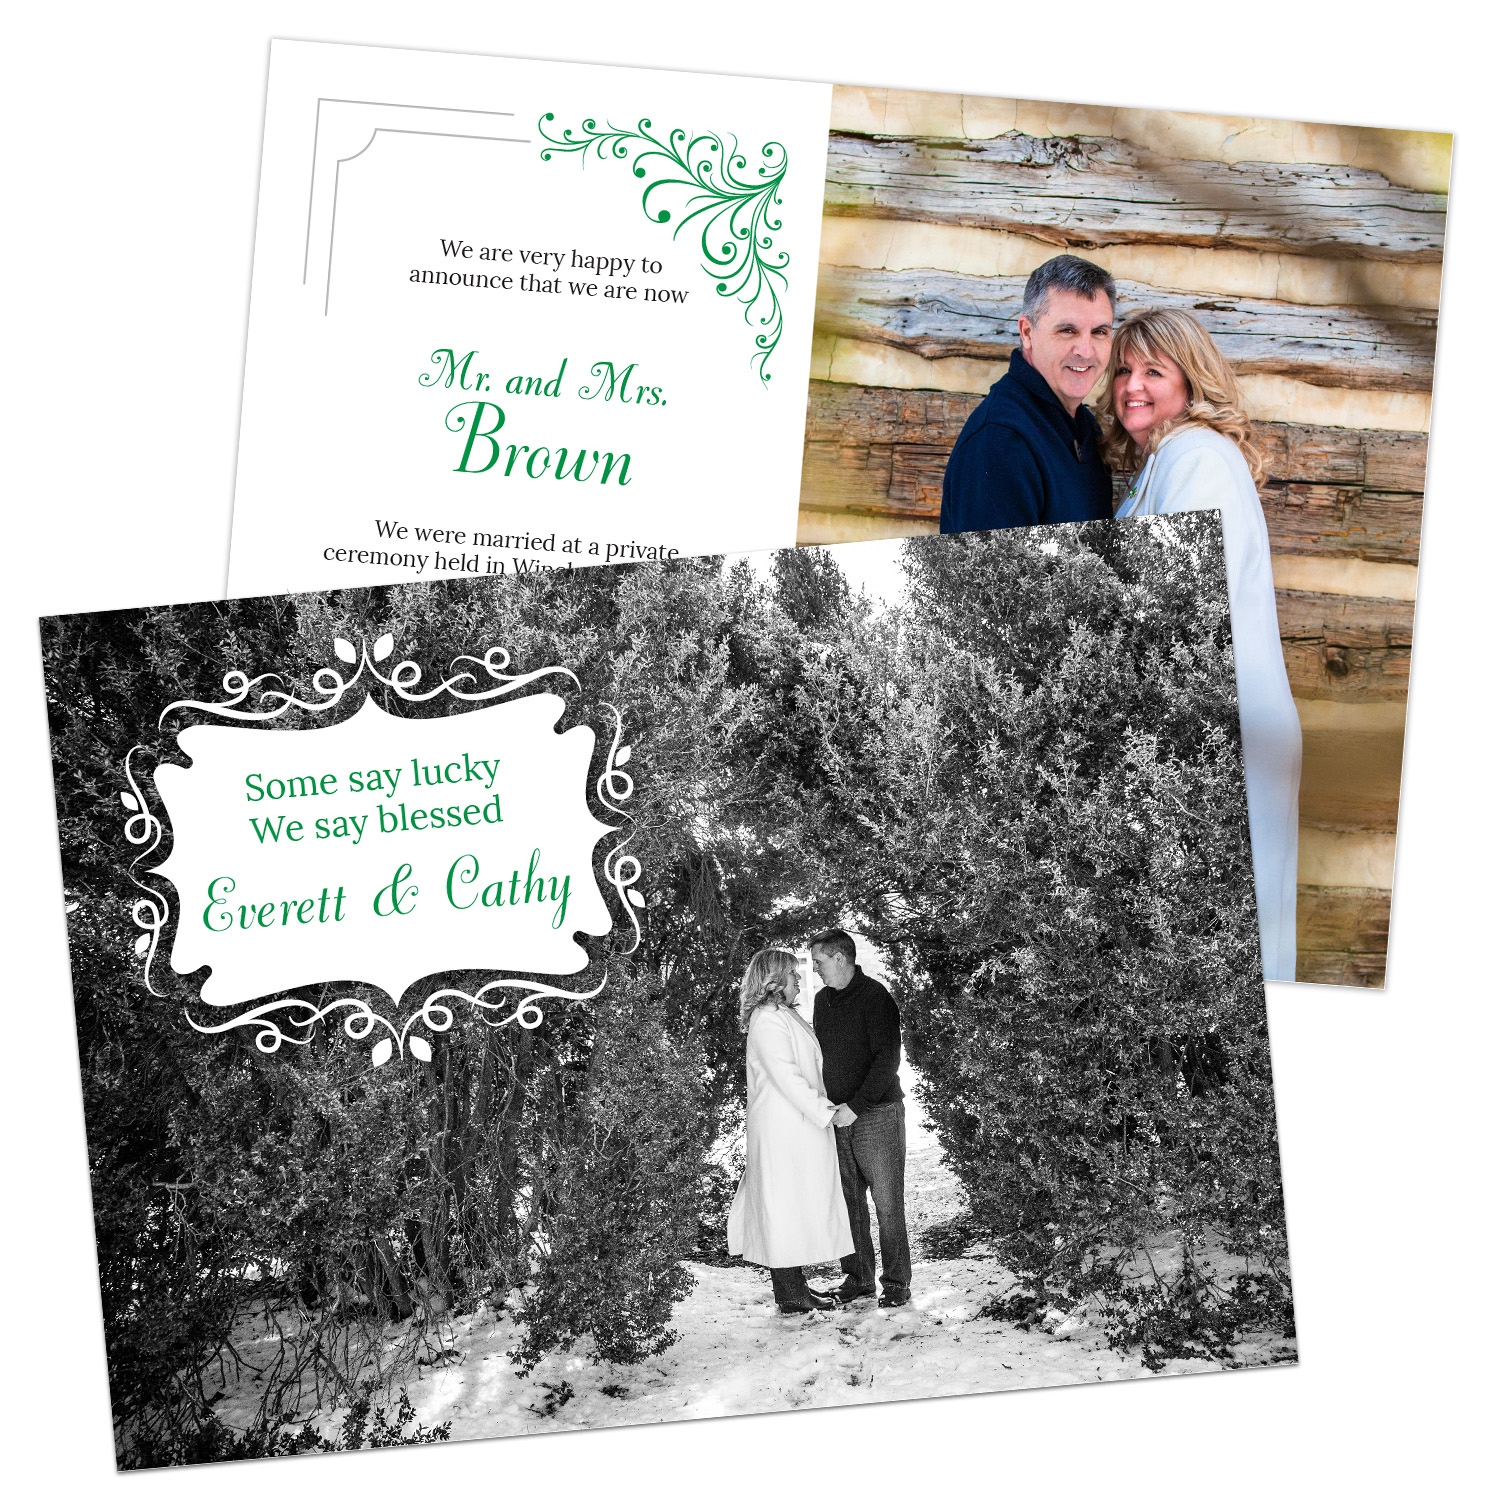 Wedding Announcement Cards - Quick Affordable Marriages and Weddings in Winchester, VA